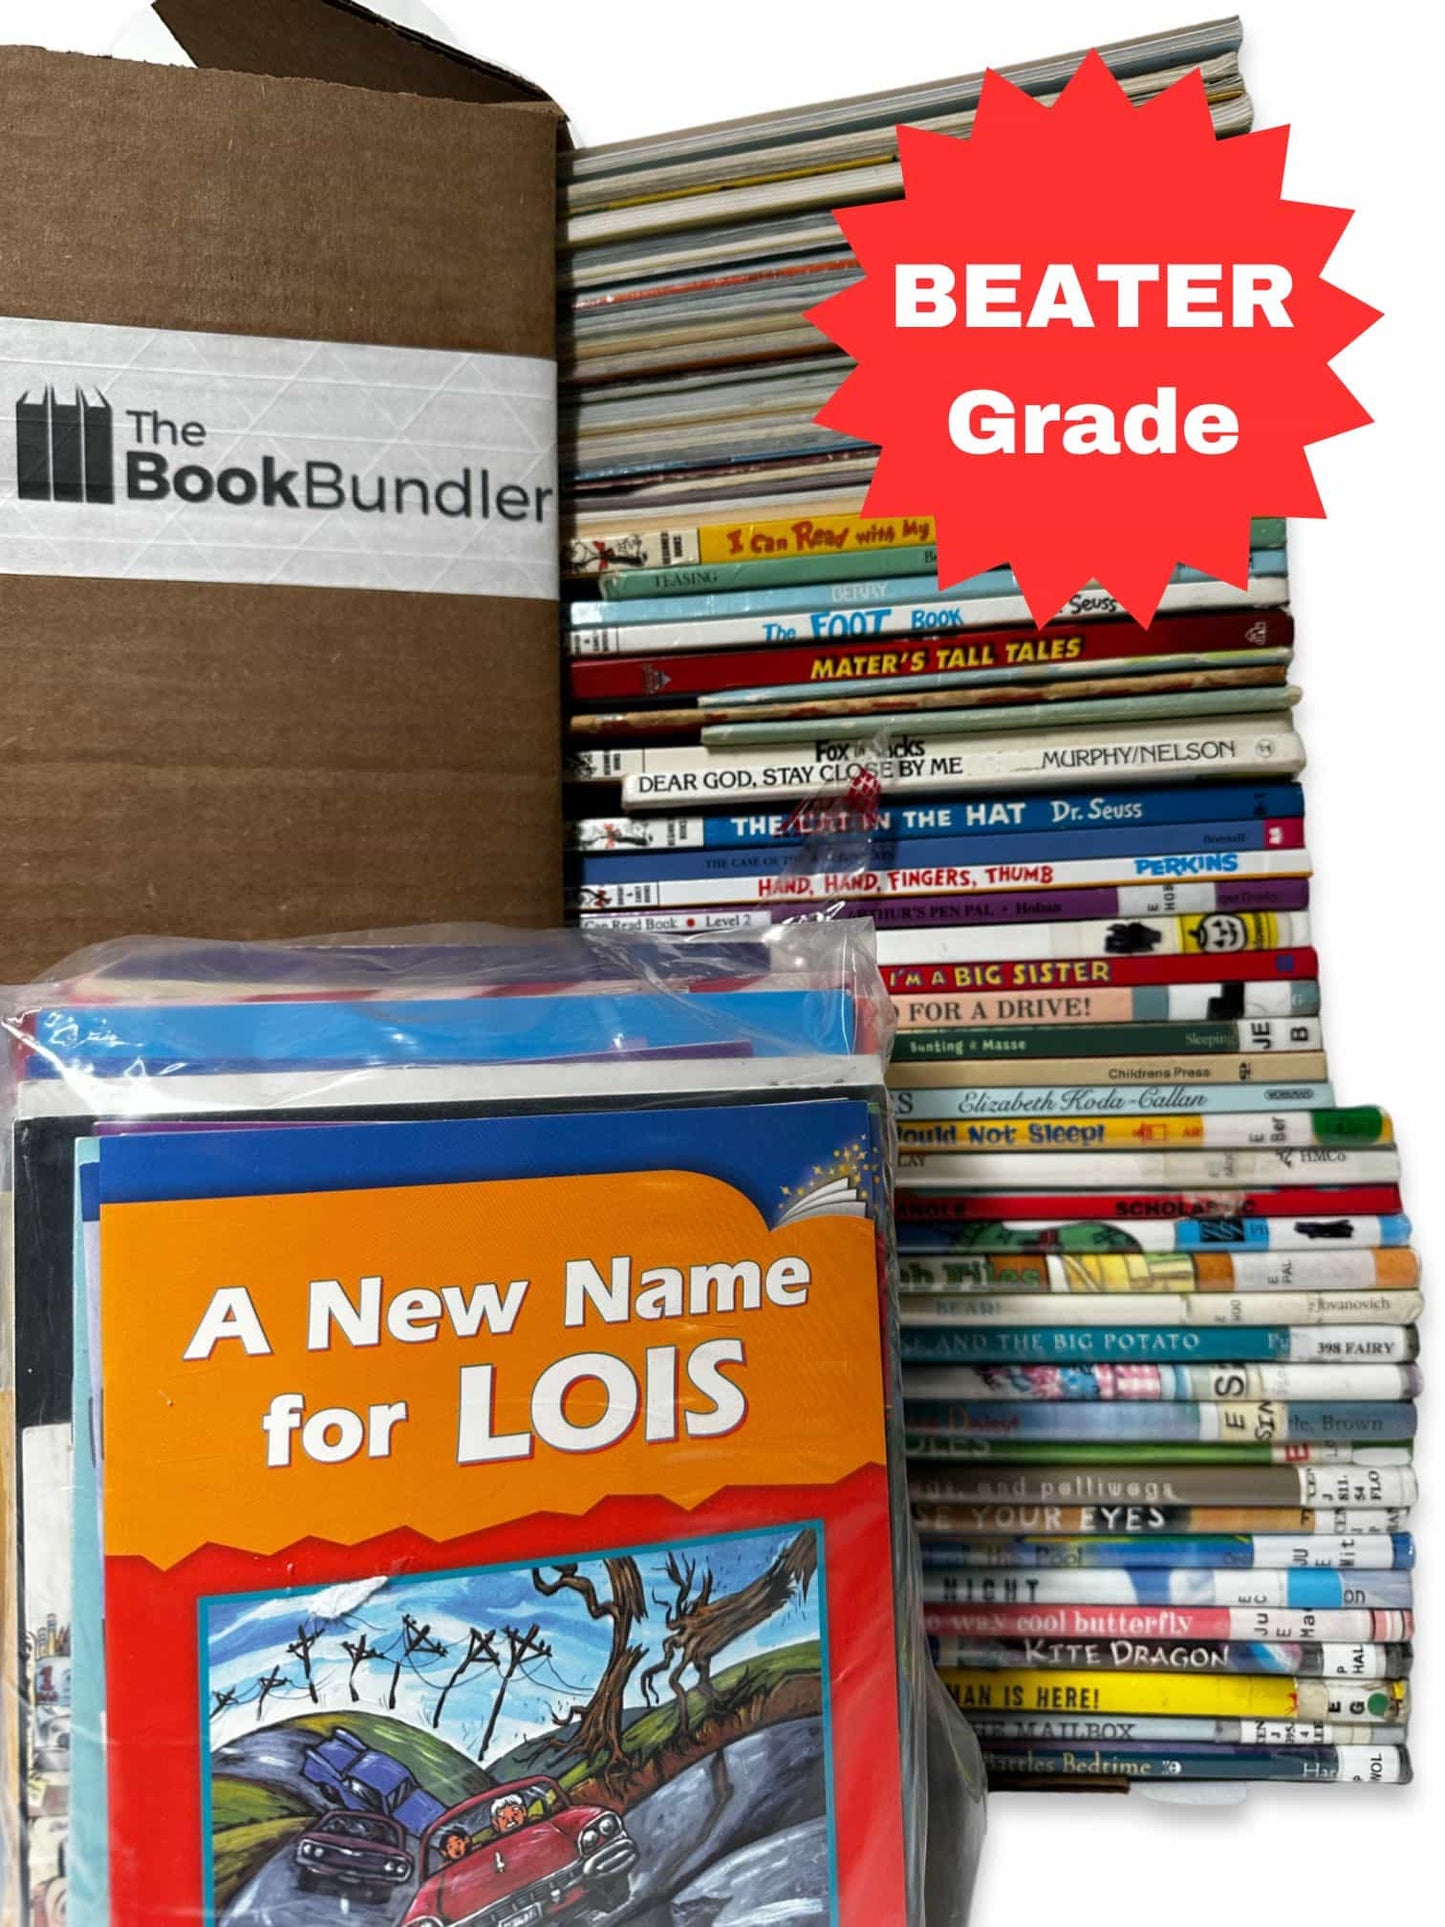 BEATER Learning to Read (Pre-K Mix) - Giant Surprise Box